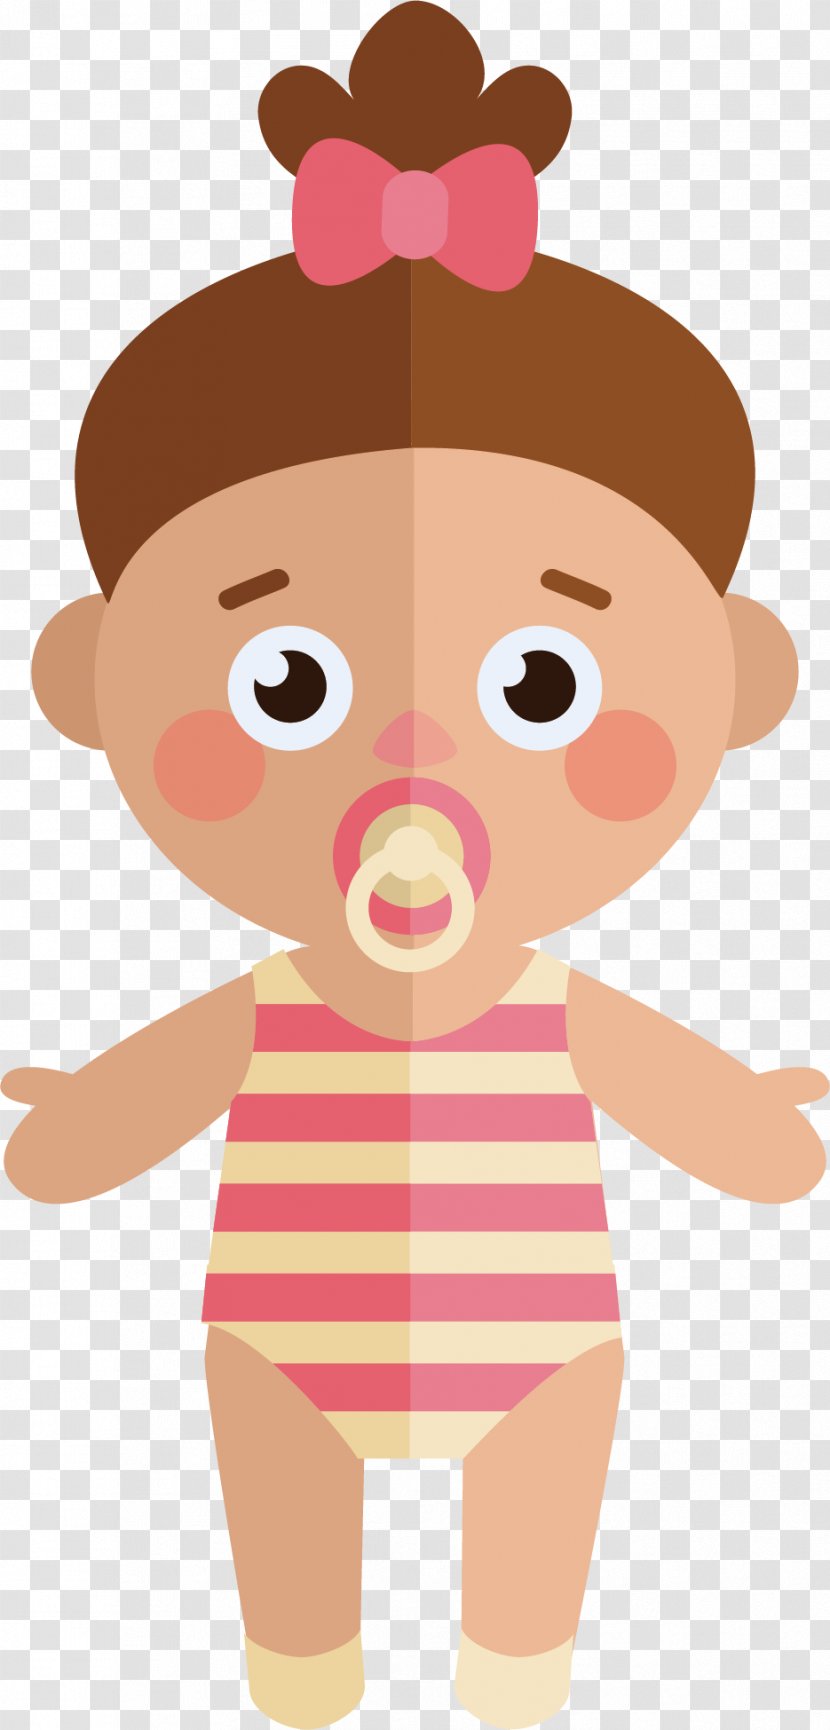 Diaper Childhood - Frame - Cute Baby Vector Transparent PNG